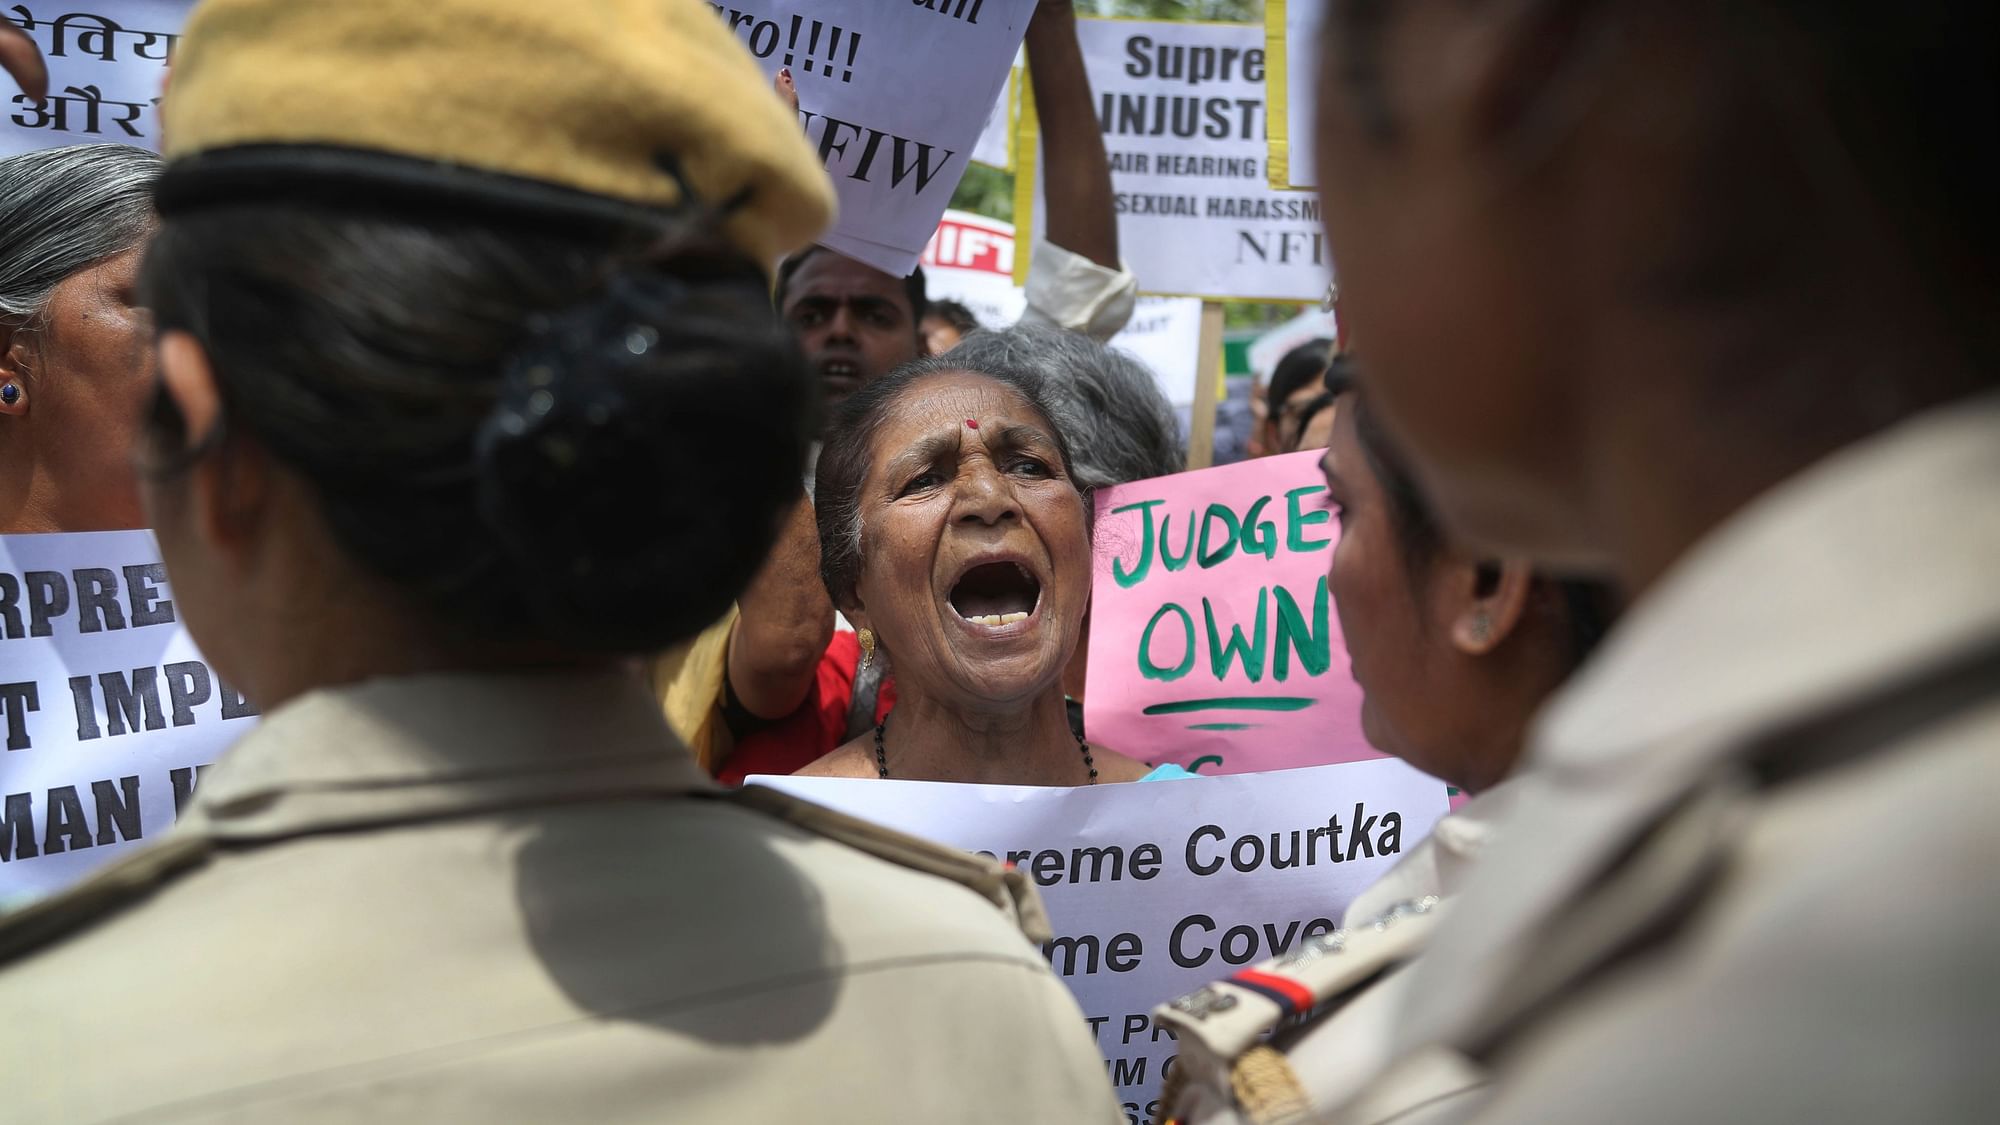 Indian women activists shout slogans during a protest against a court inquiry that cleared India’s Chief Justice of sexual harassment allegations made by a former employee at his official residence, in New Delhi.